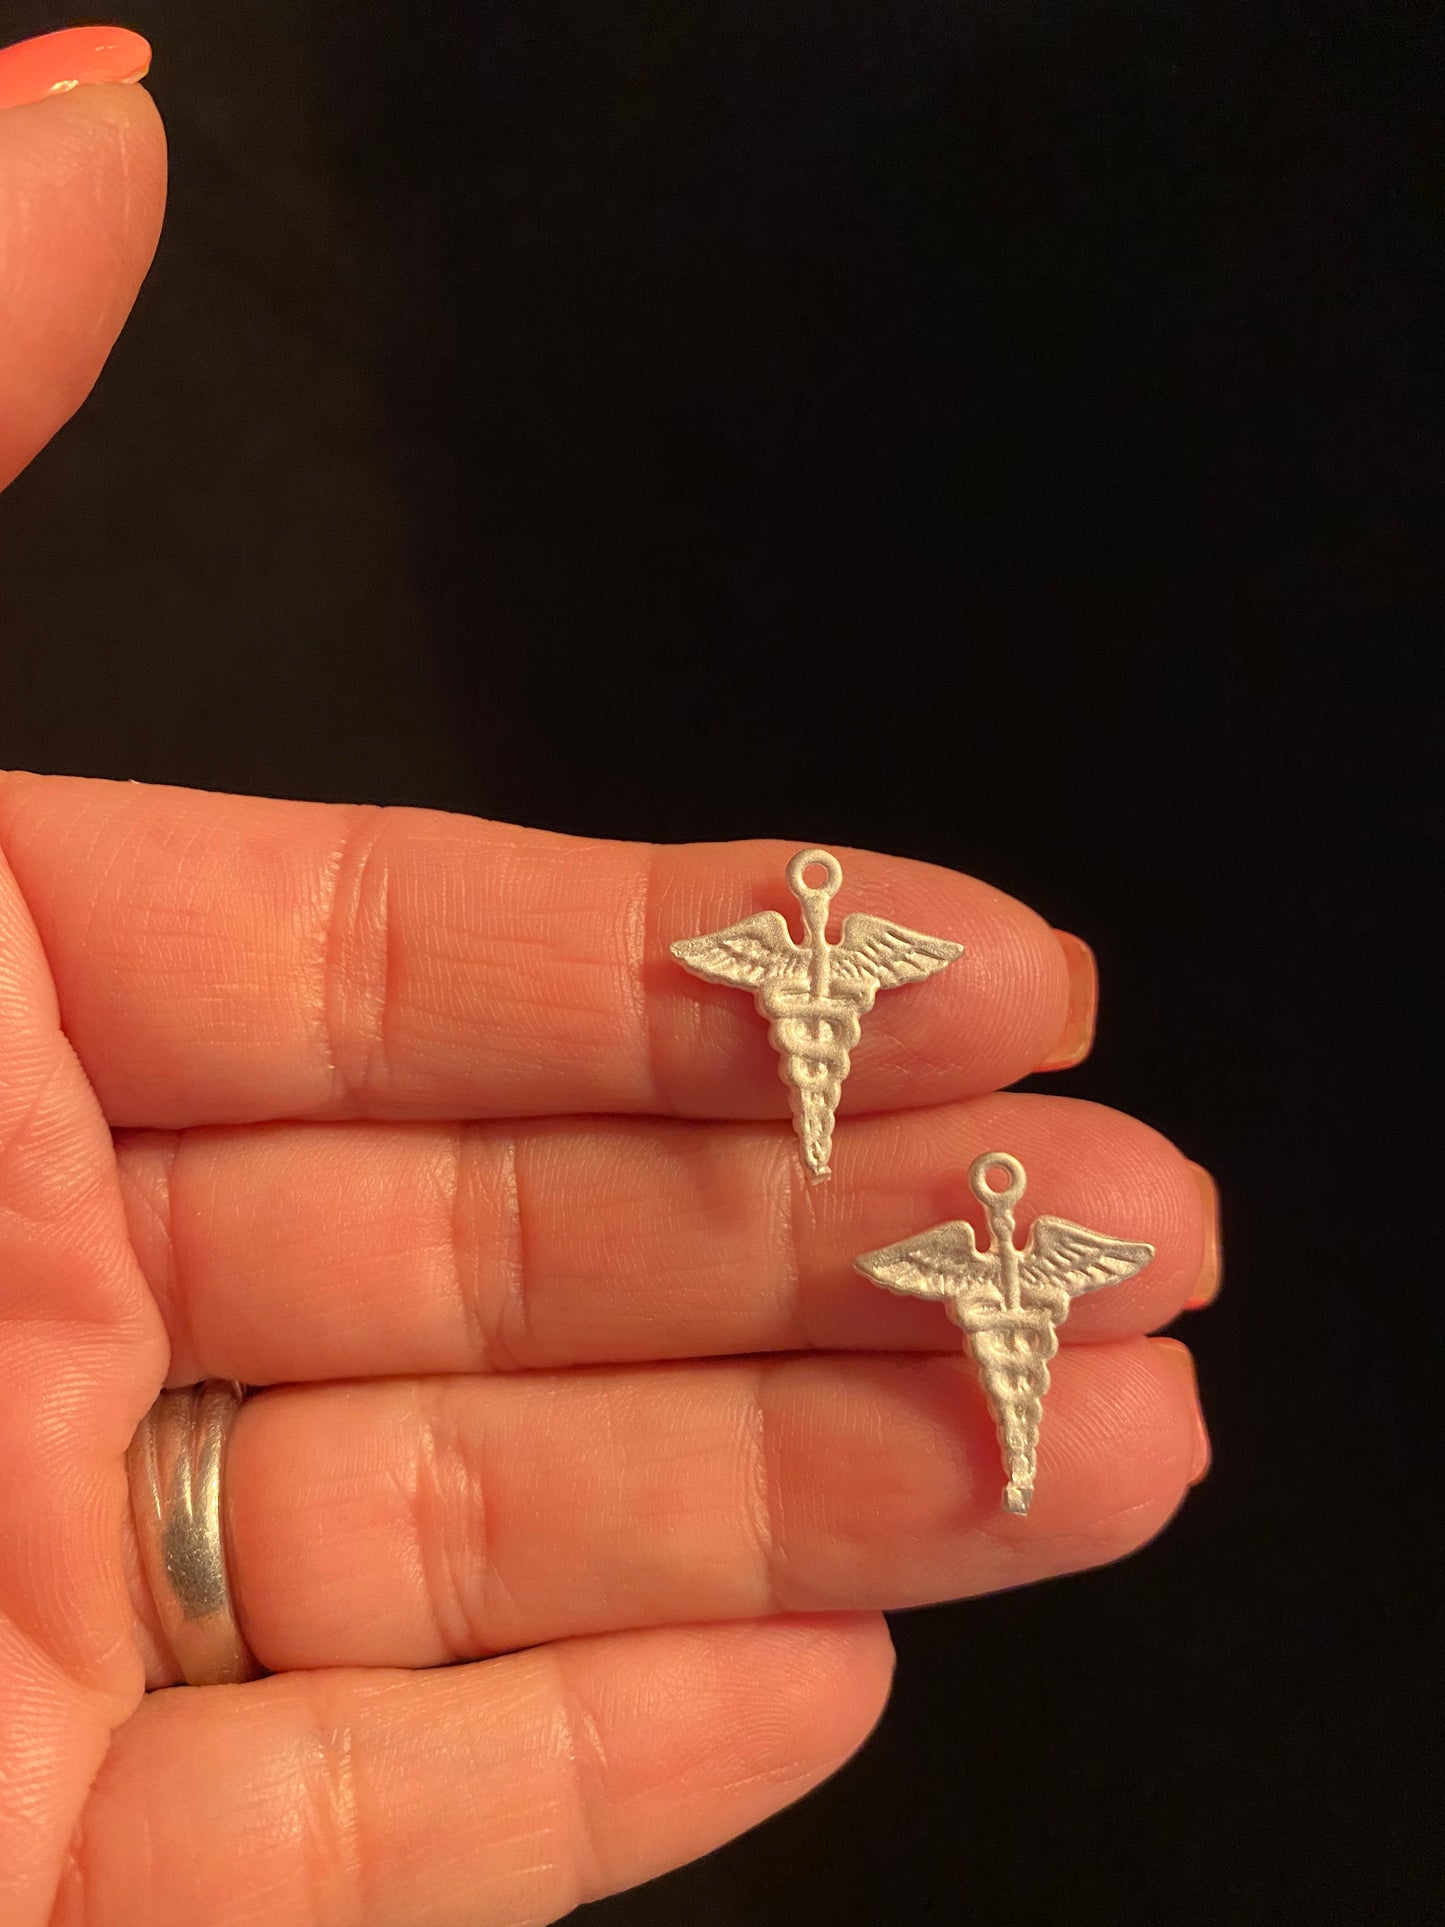 Caduceus Casting in Sterling Silver and 14K Yellow Gold for Jewelry Design